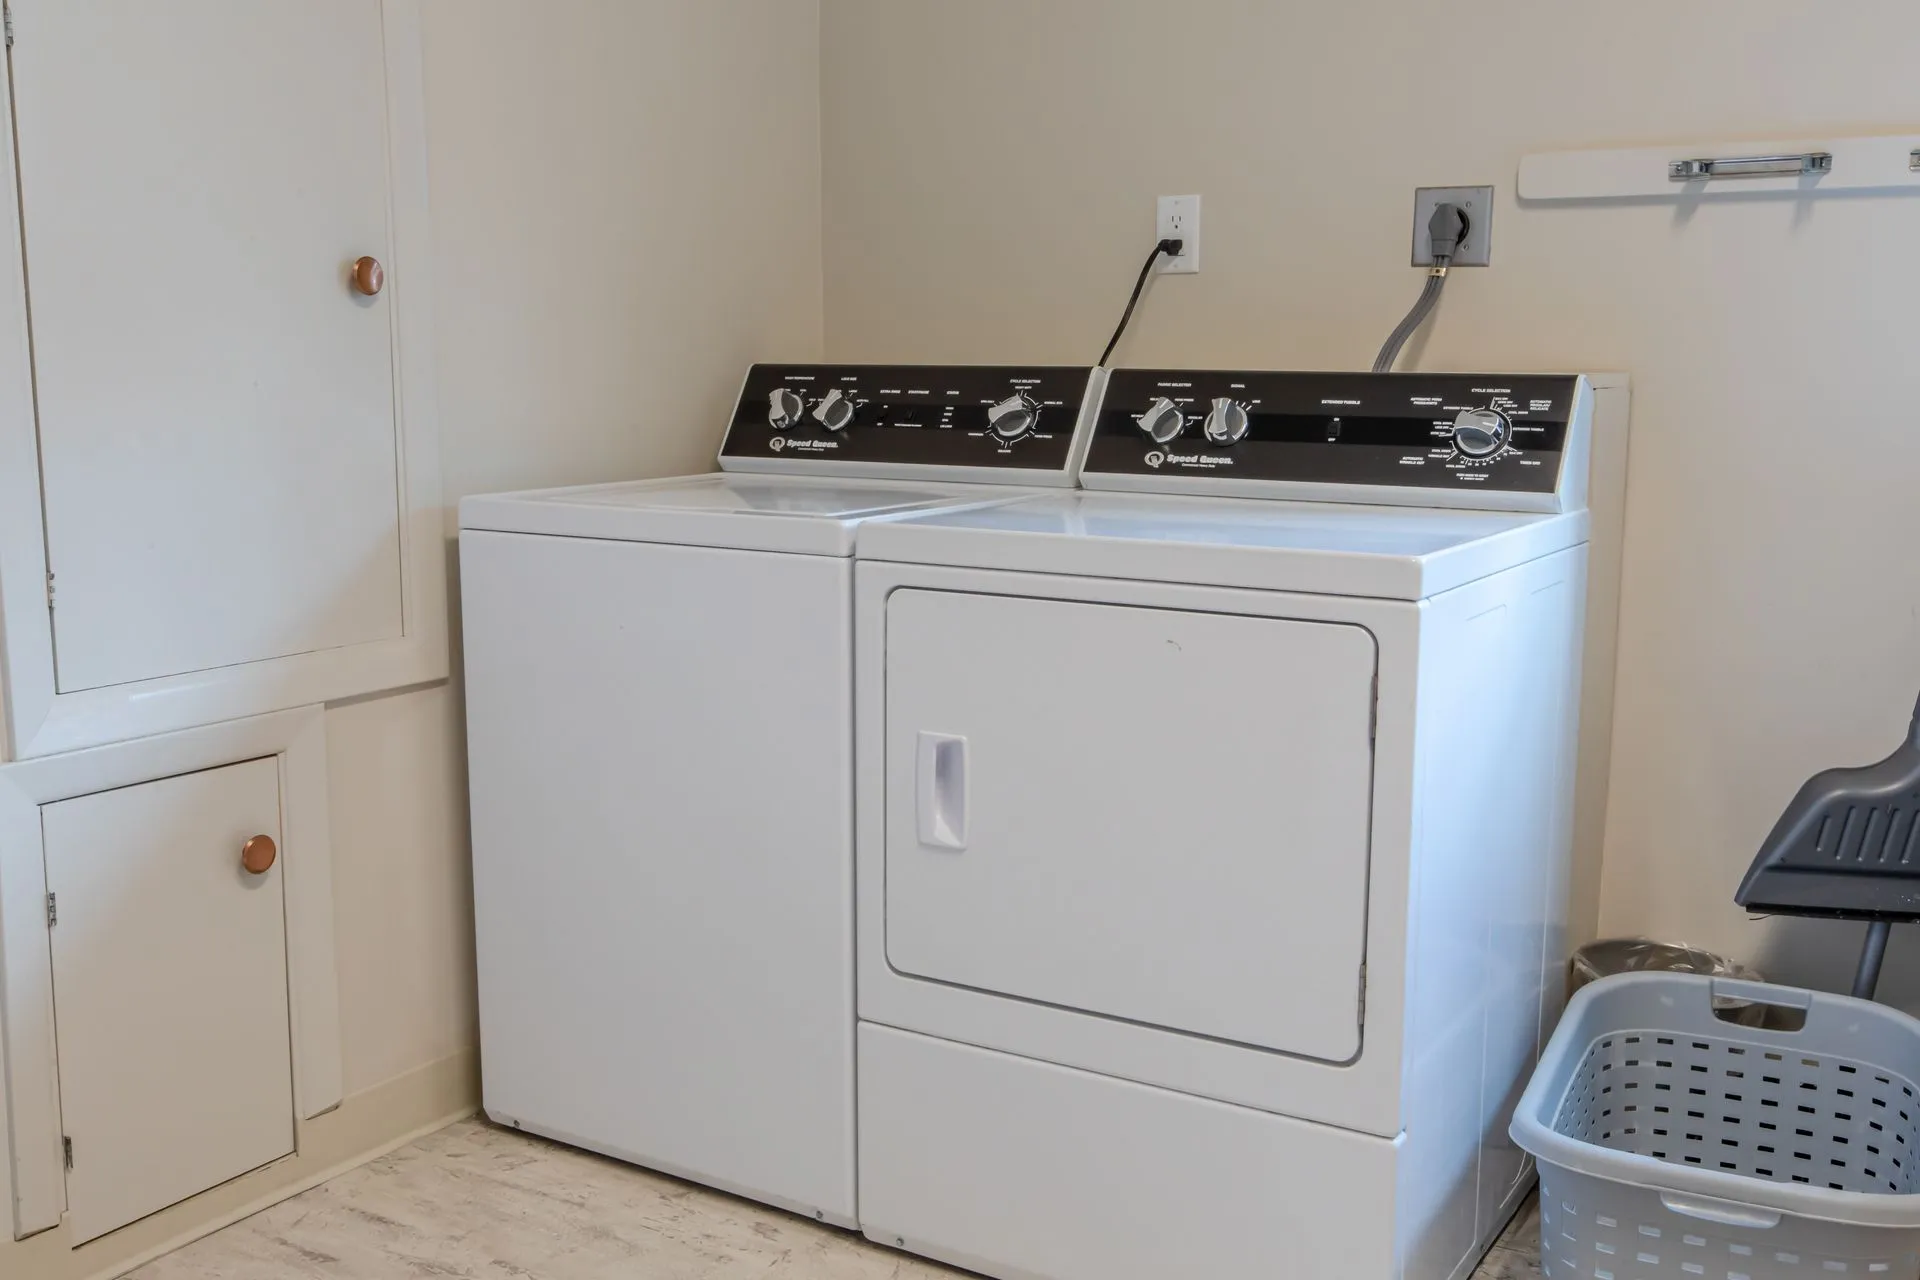 Vacation Rental in Cannon Beach, Sona Tra washer and dryer